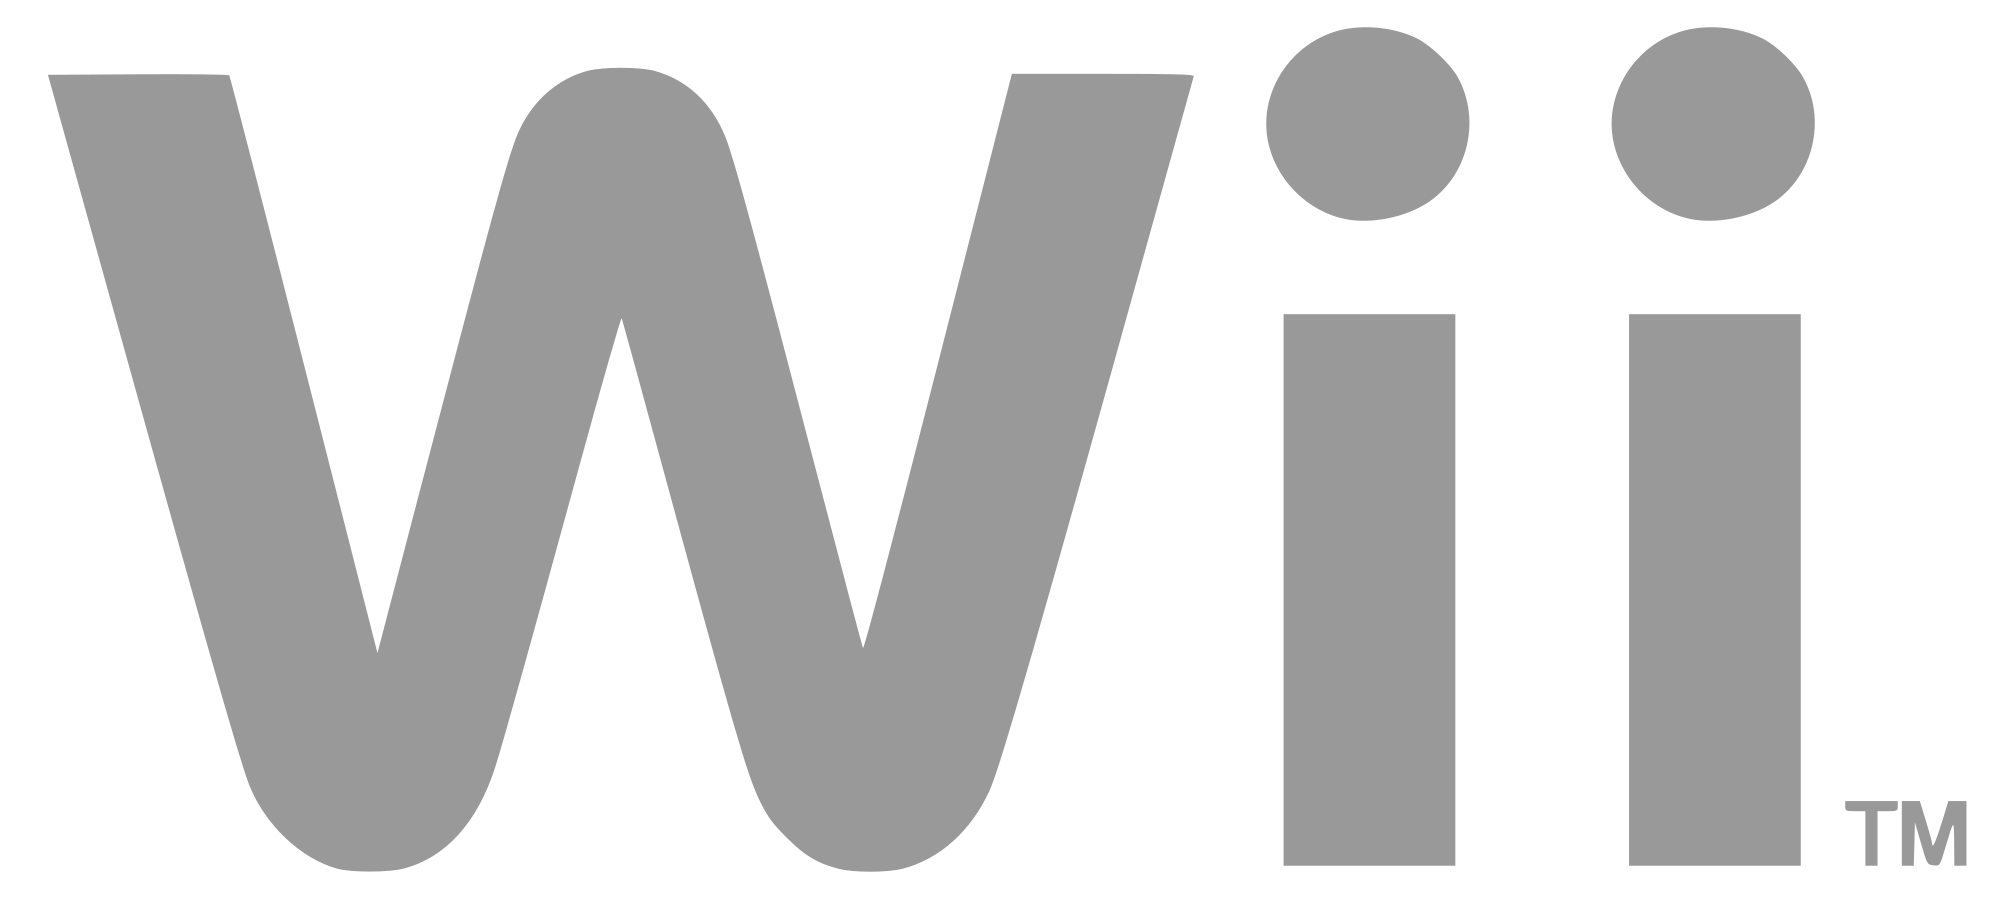 Wii - The Nintendo Wiki - Wii, Nintendo DS, and all things Nintendo